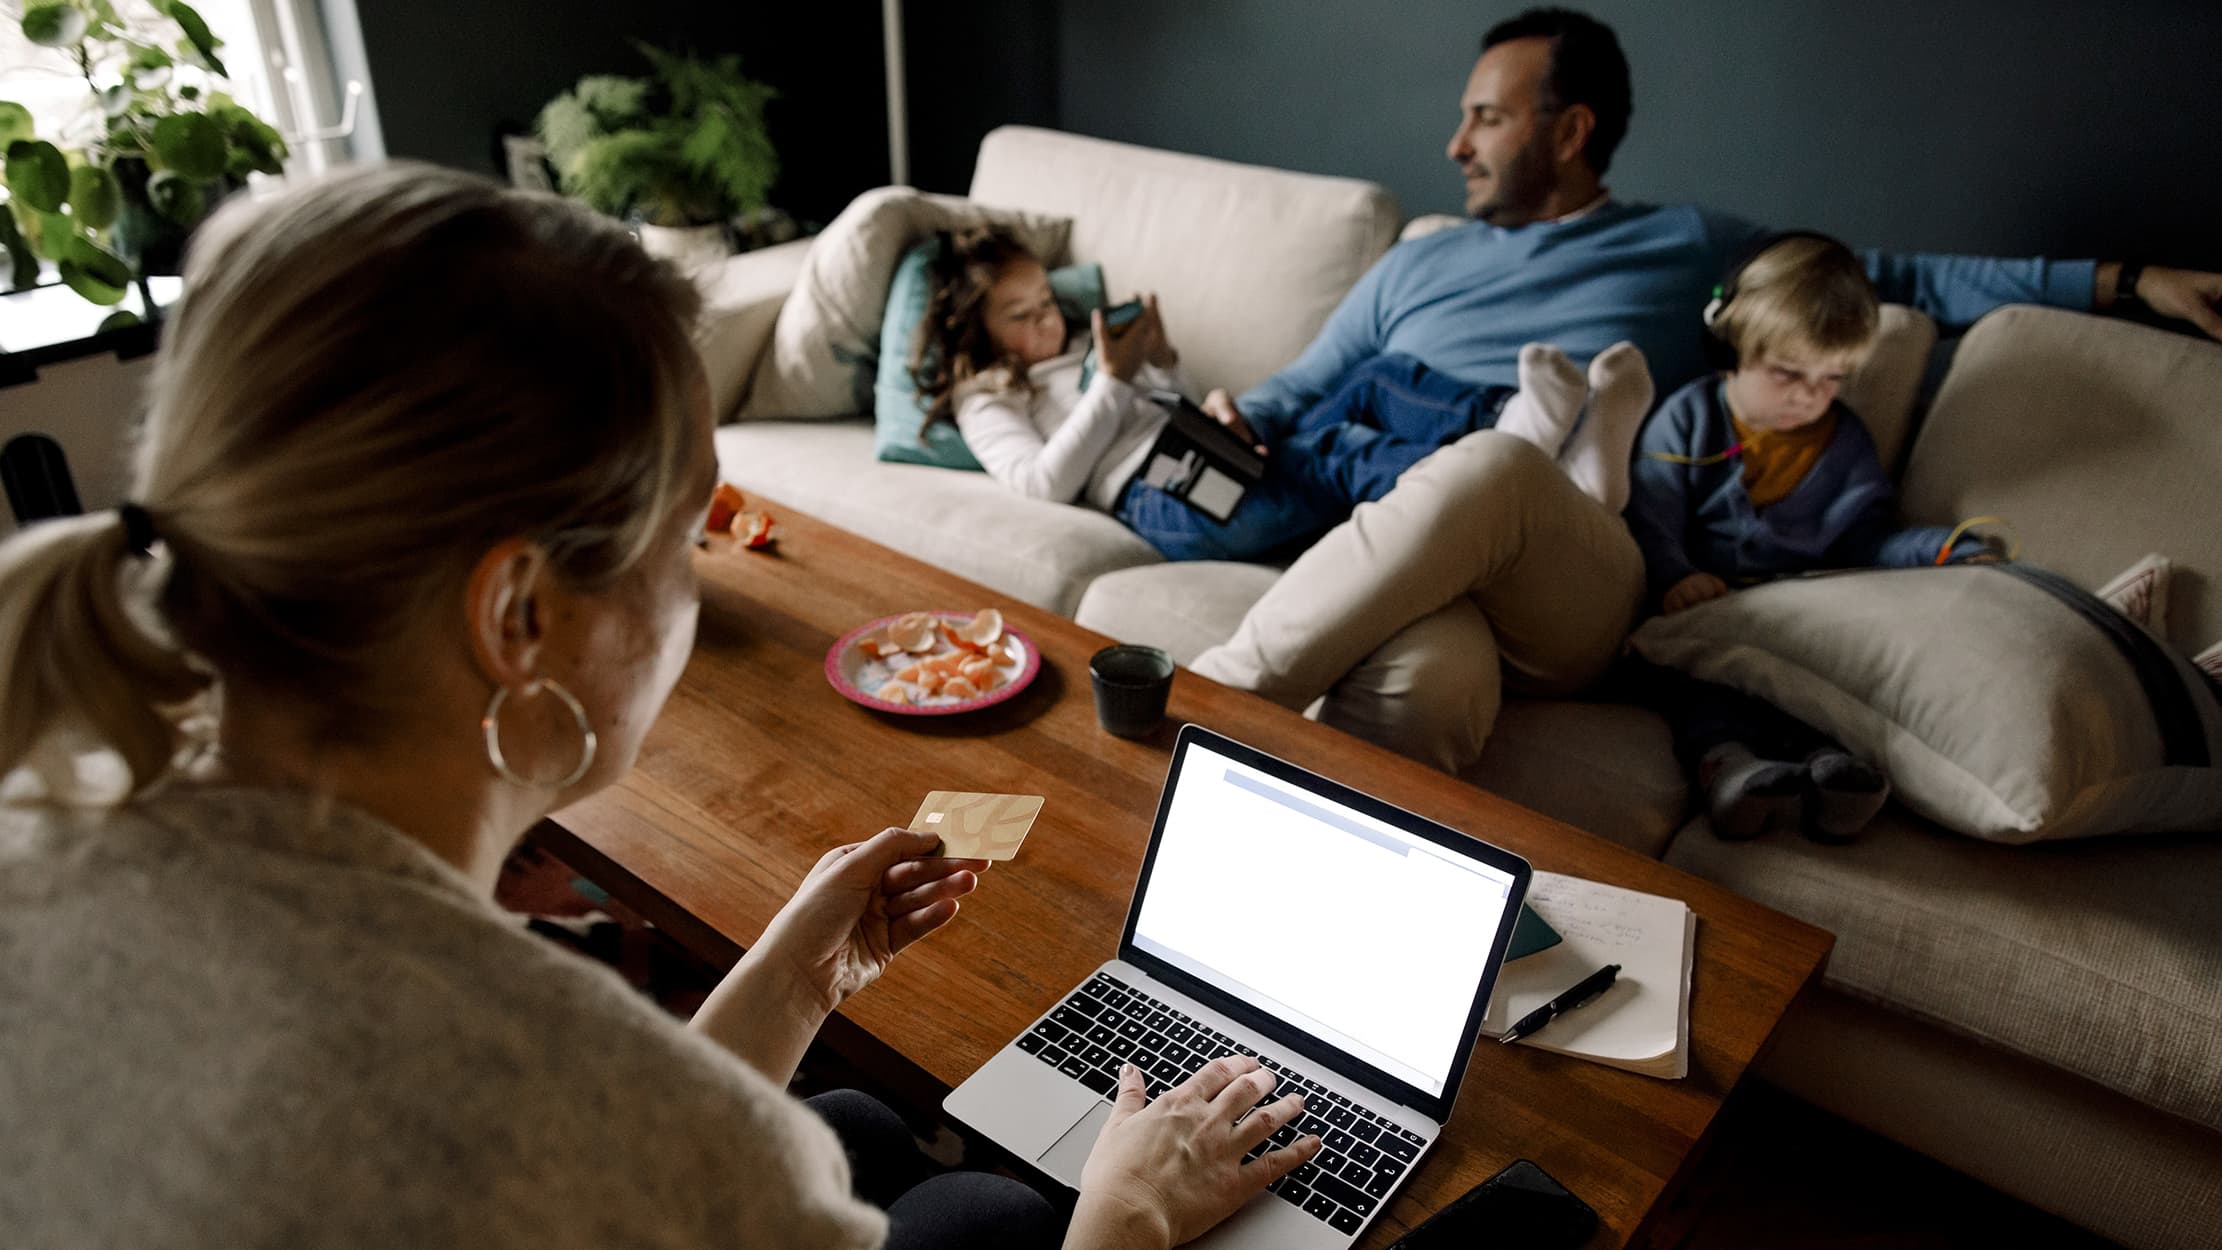 Woman inputting card details on laptop with man and child lying down on a couch